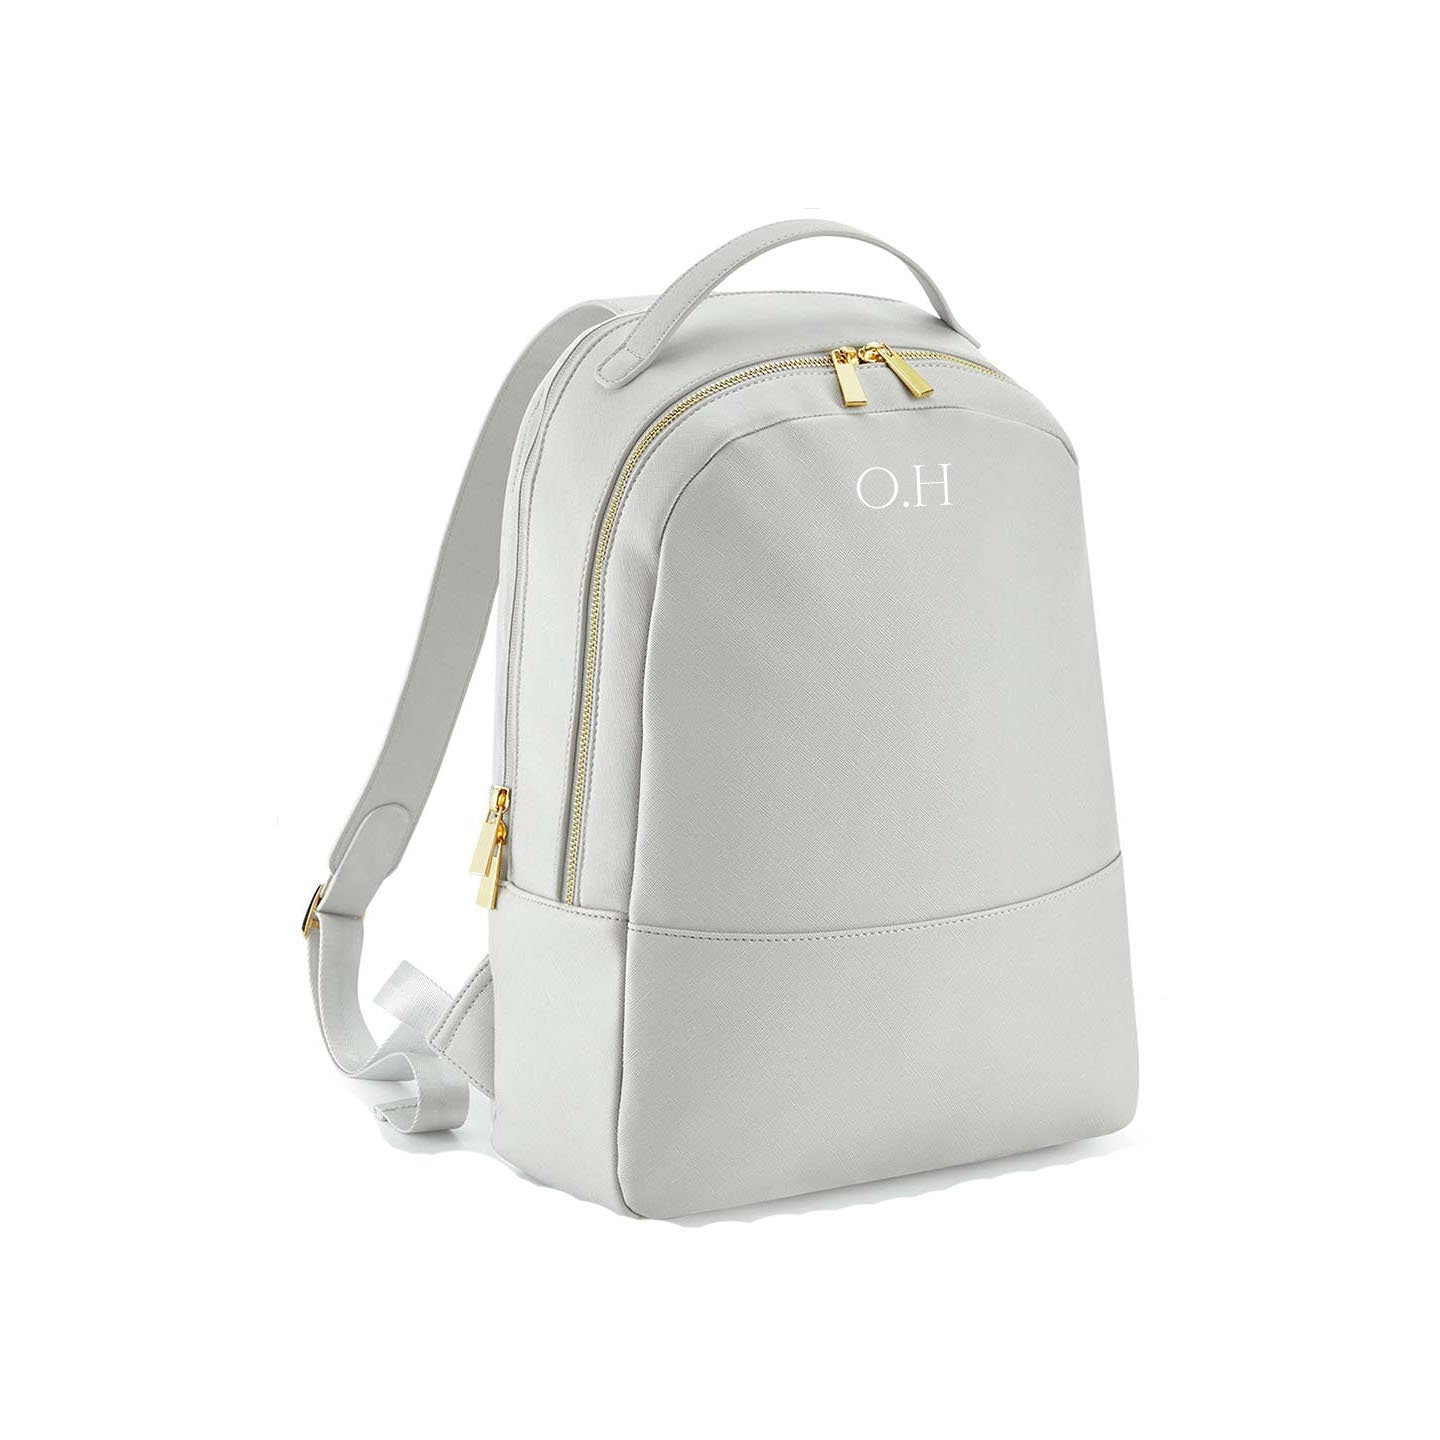 Personalised backpack with Initials